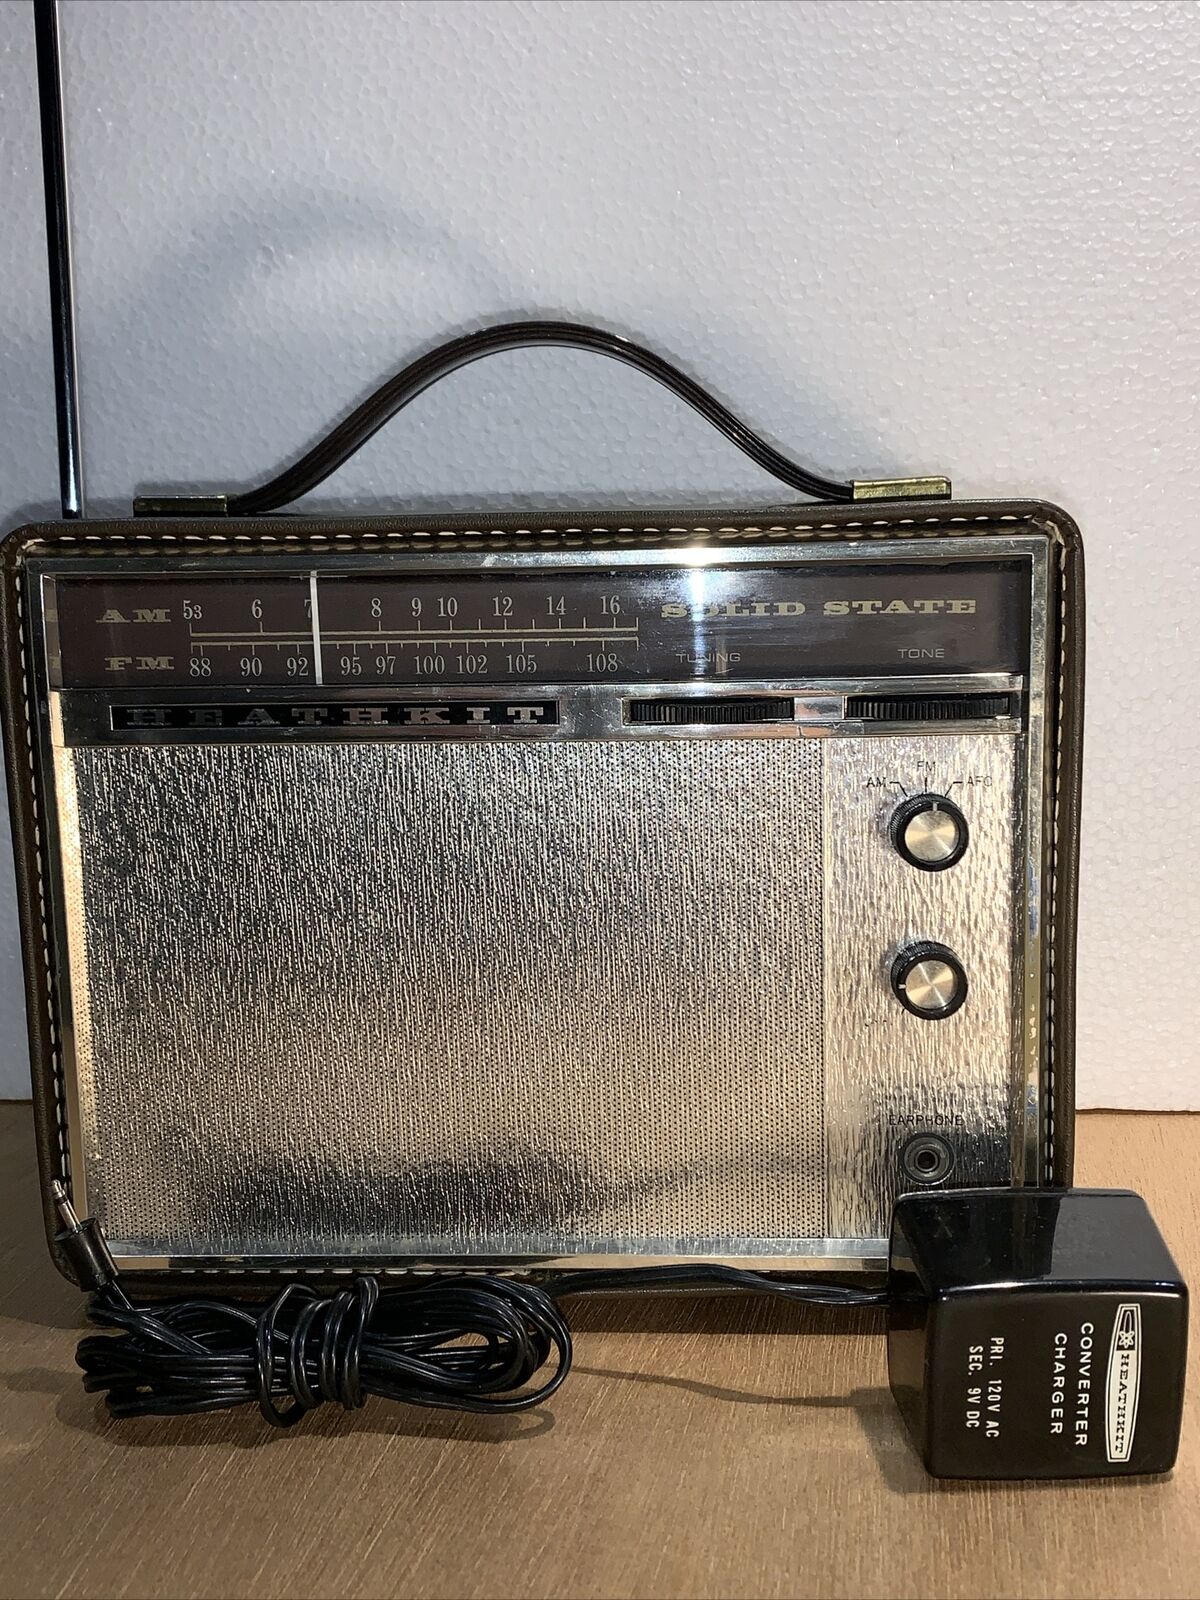 Heathkit Model GR-17 AM/FM Solid State Radio, Tested, Working With Charger